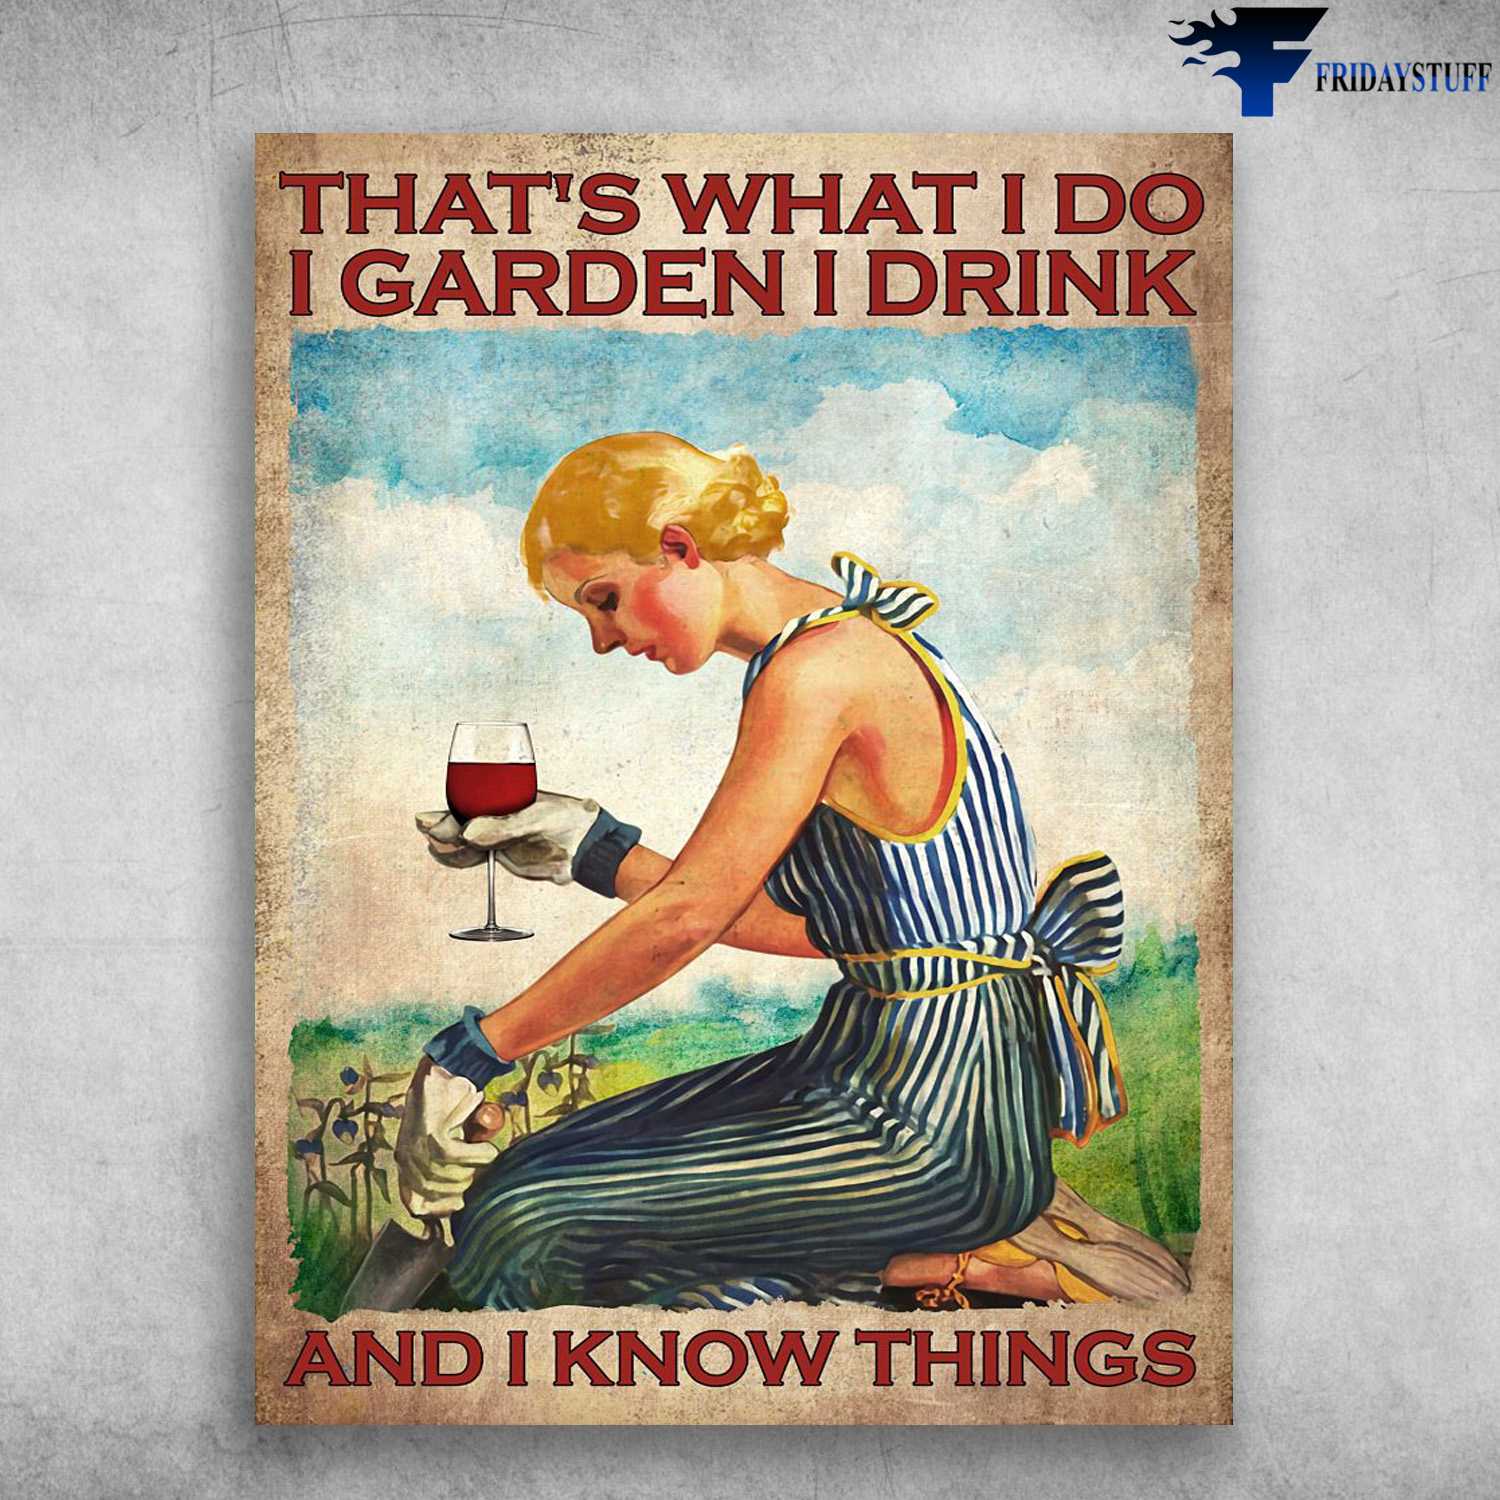 Girl Gardening, Gardening And Wine - That What I Do, I Garden, I Drink, And I Know Things